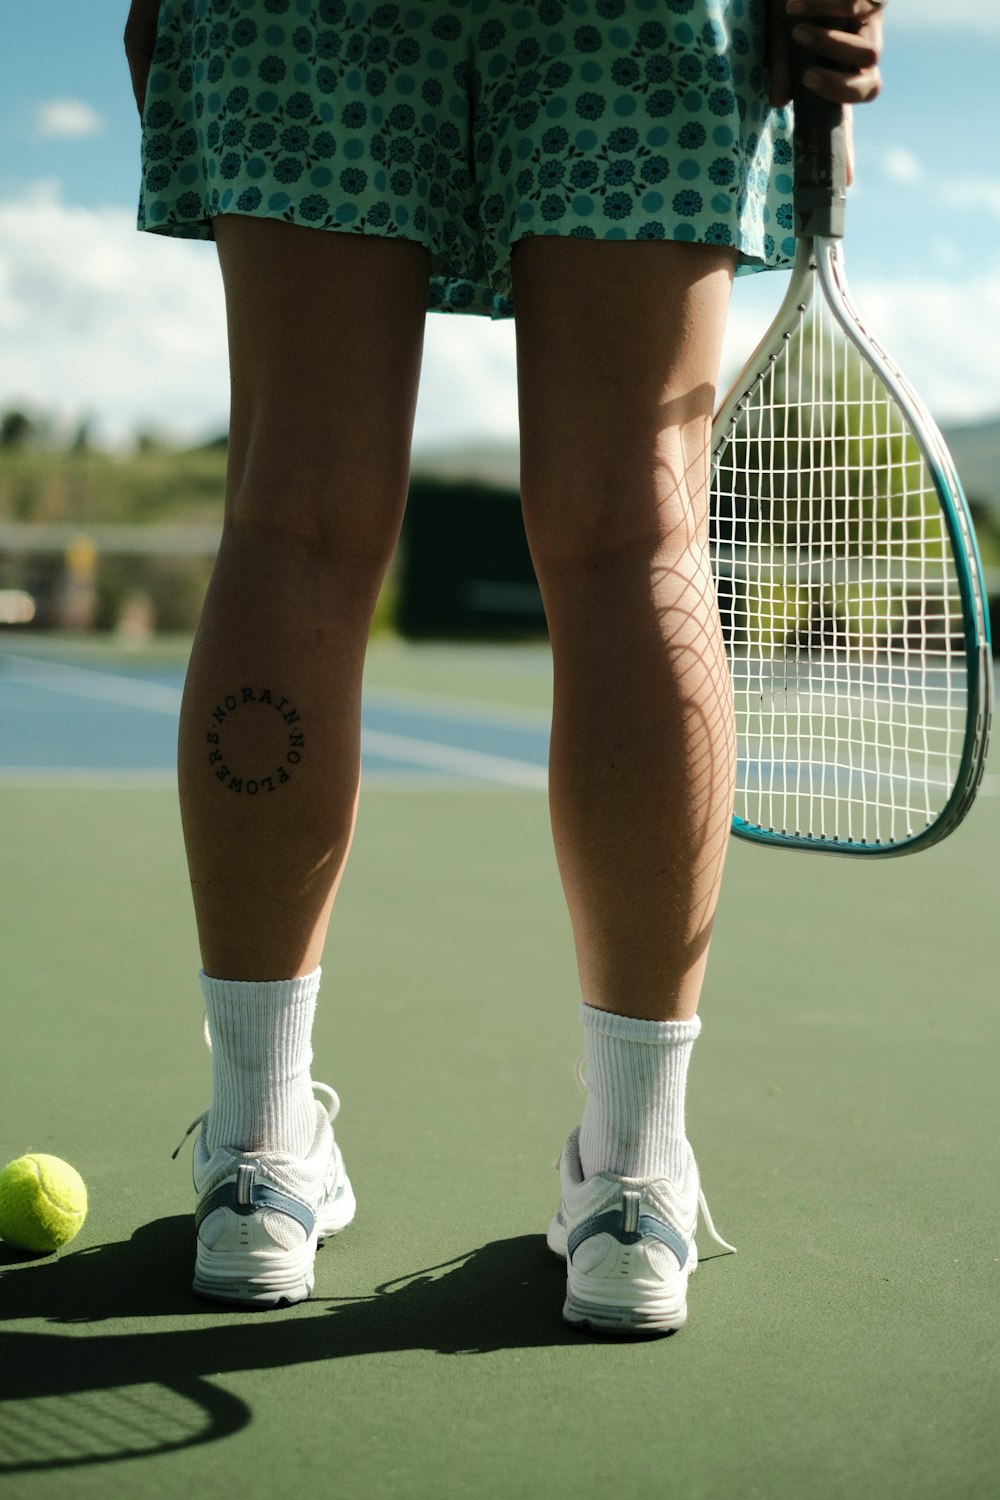 a person holding a tennis racket